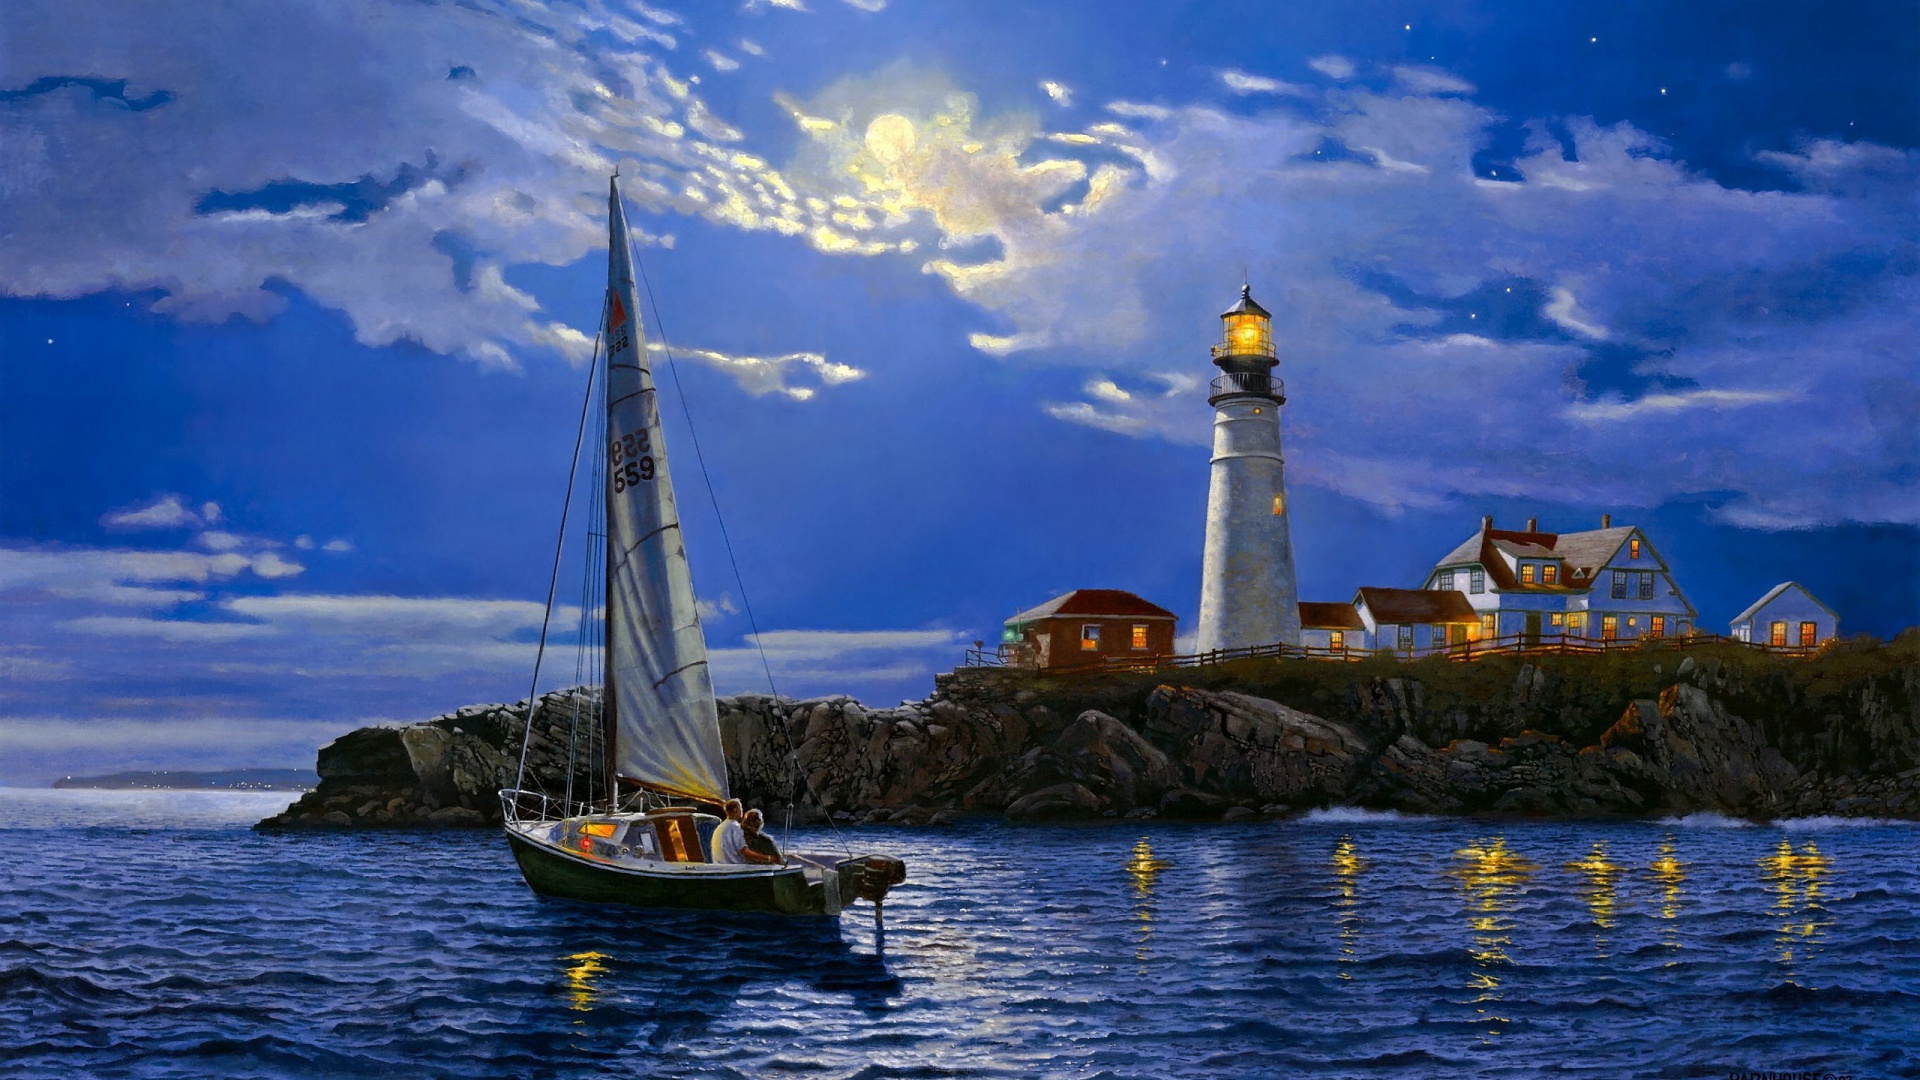 Art Paintaings Love Romance Sailing Boats Architecture Lighthouse